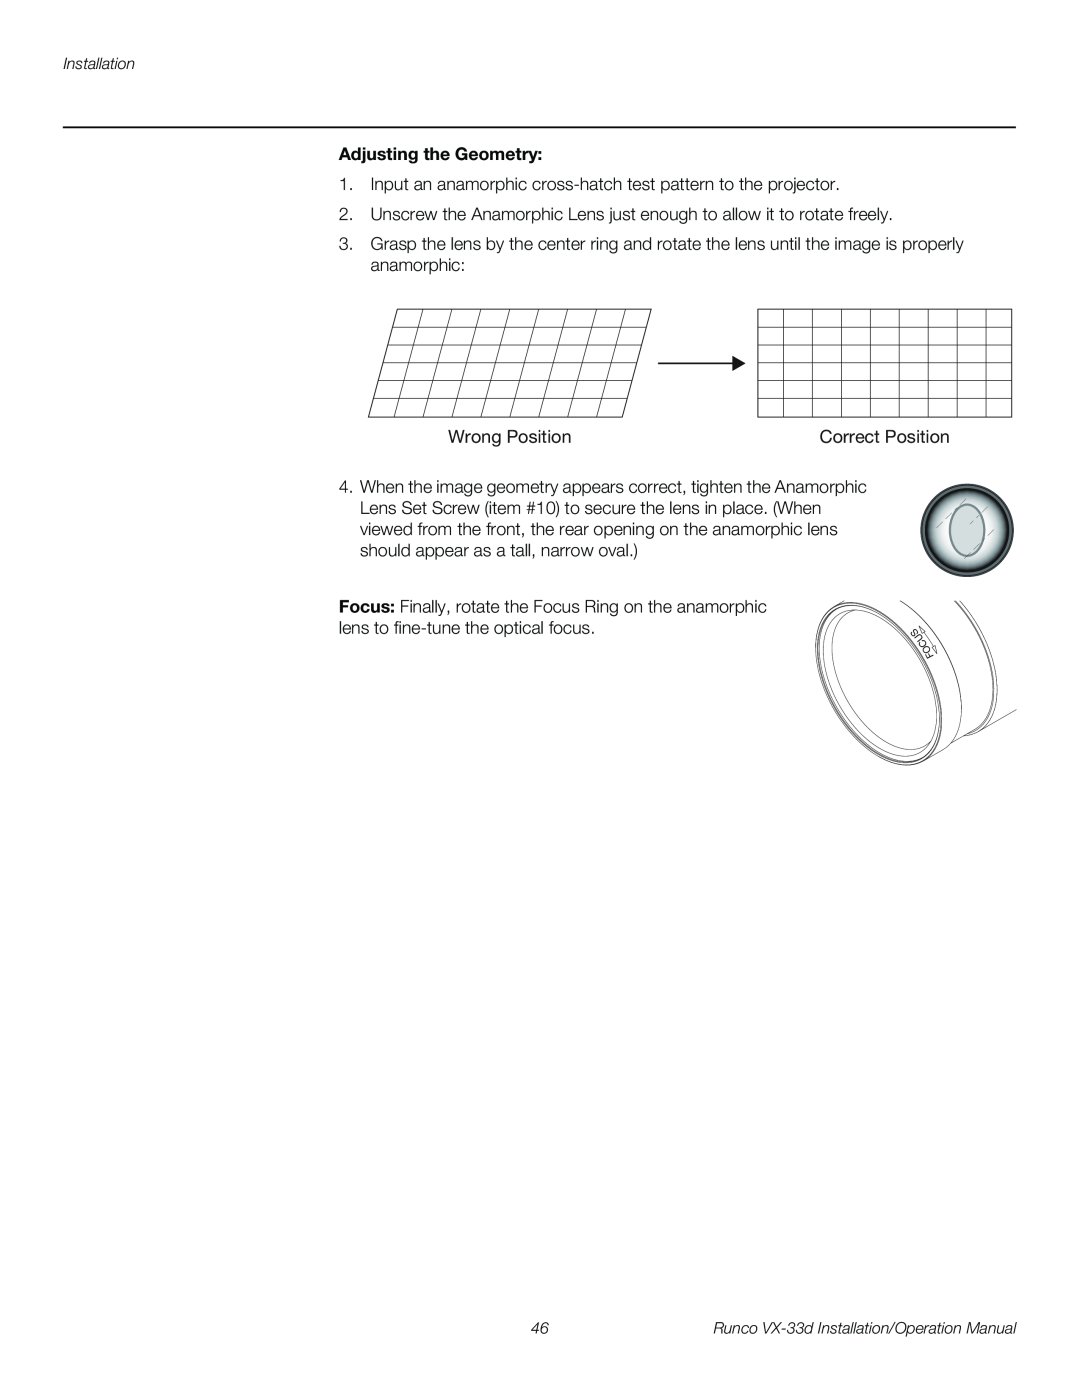 Runco VX-33D operation manual Wrong Position, Adjusting the Geometry 